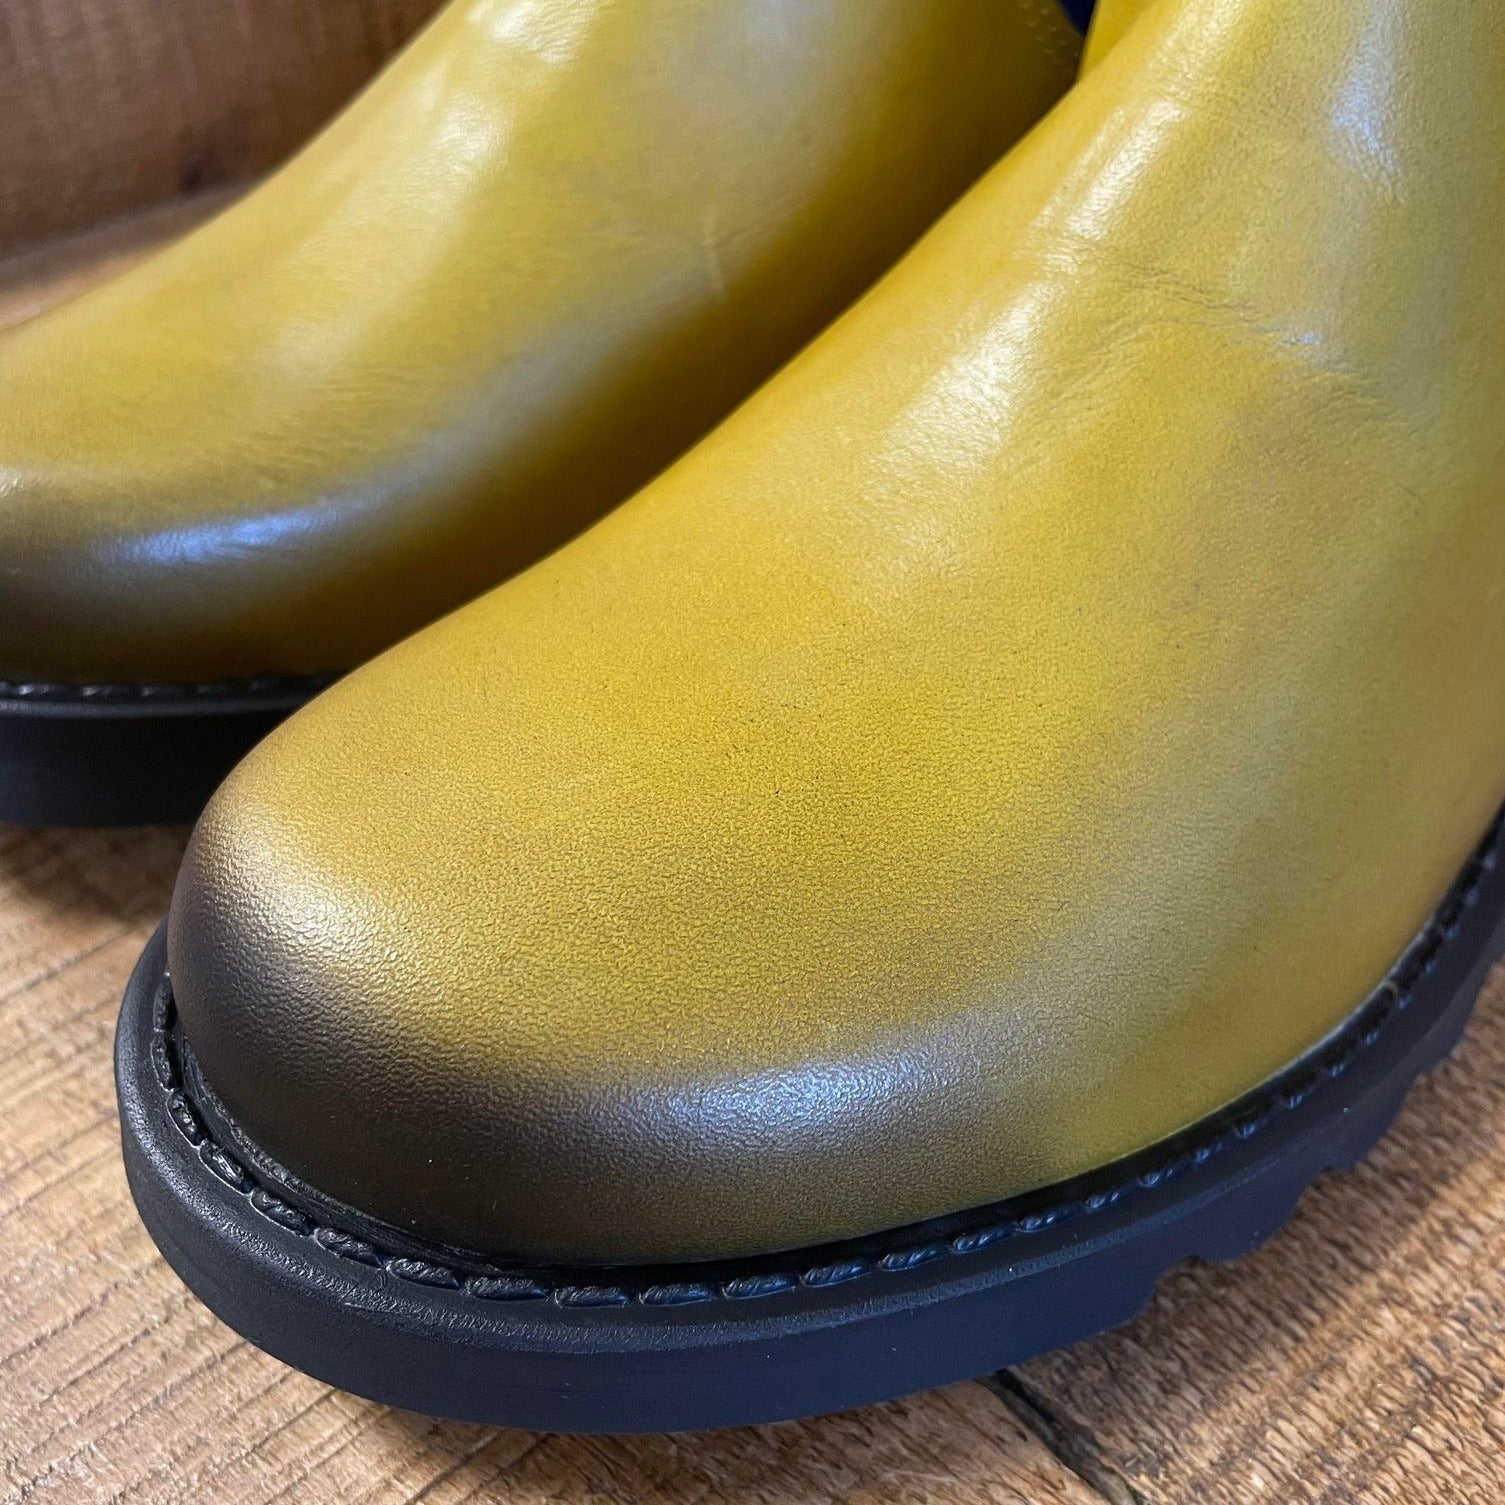 Fly London Salv Yellow & Blue Chelsea Boots – Captain Jellyfish